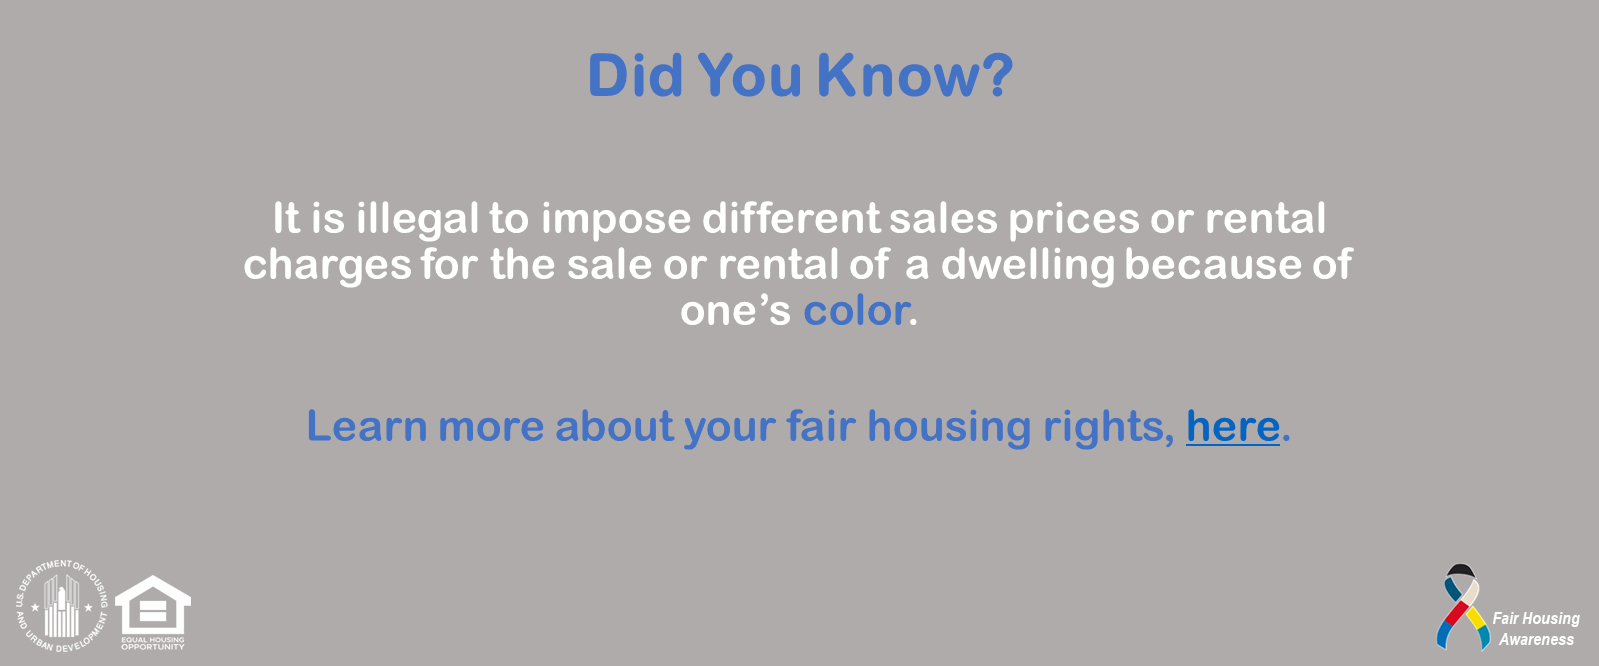 [It is illegal to impose different sales prices or rental charges for the sale or rental of a dwelling because of one's color.]. HUD Photo